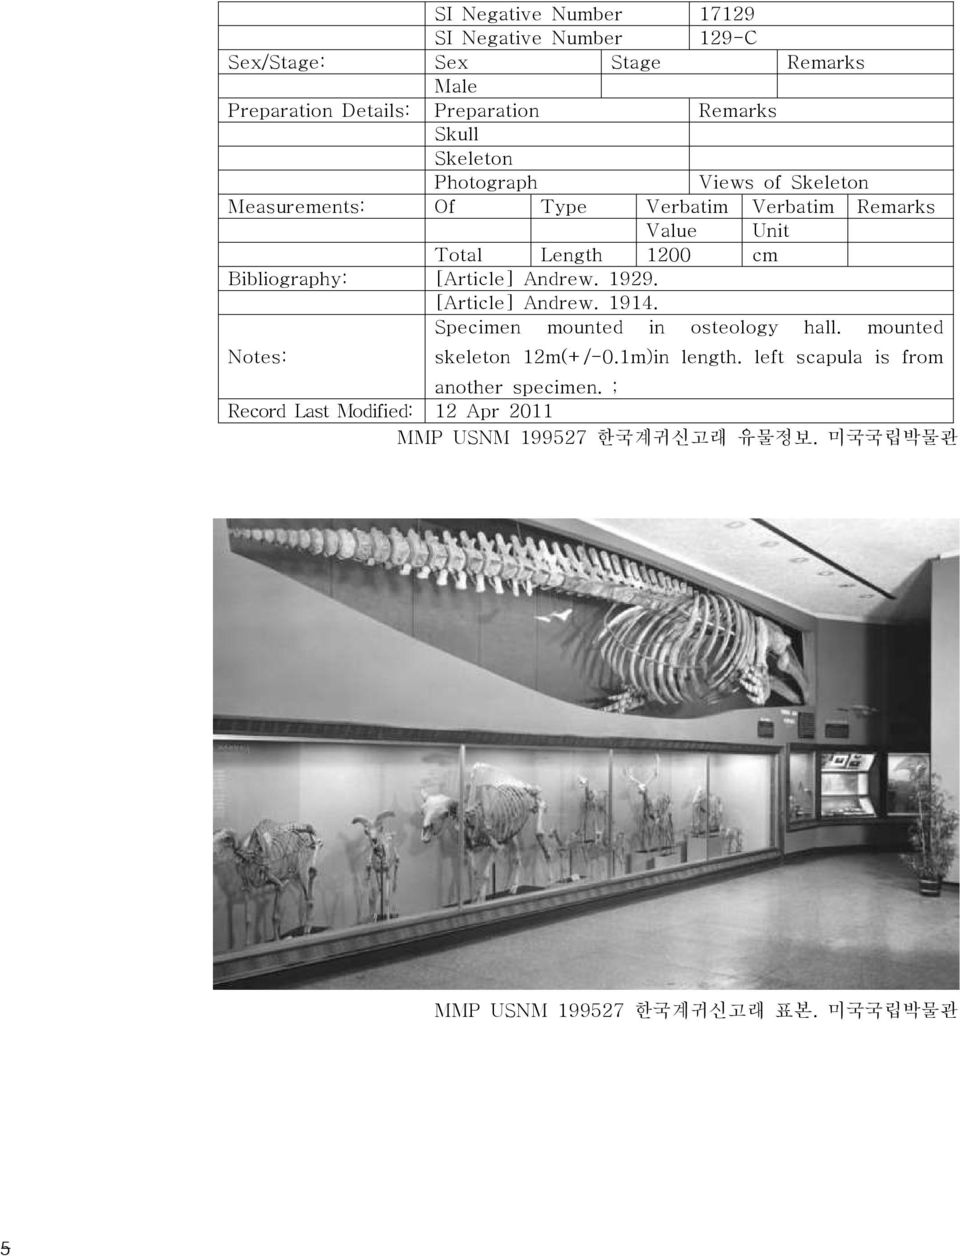 [Article] Andrew. 1929. [Article] Andrew. 1914. Specimen mounted in osteology hall. mounted Notes: skeleton 12m(+/-0.1m)in length.